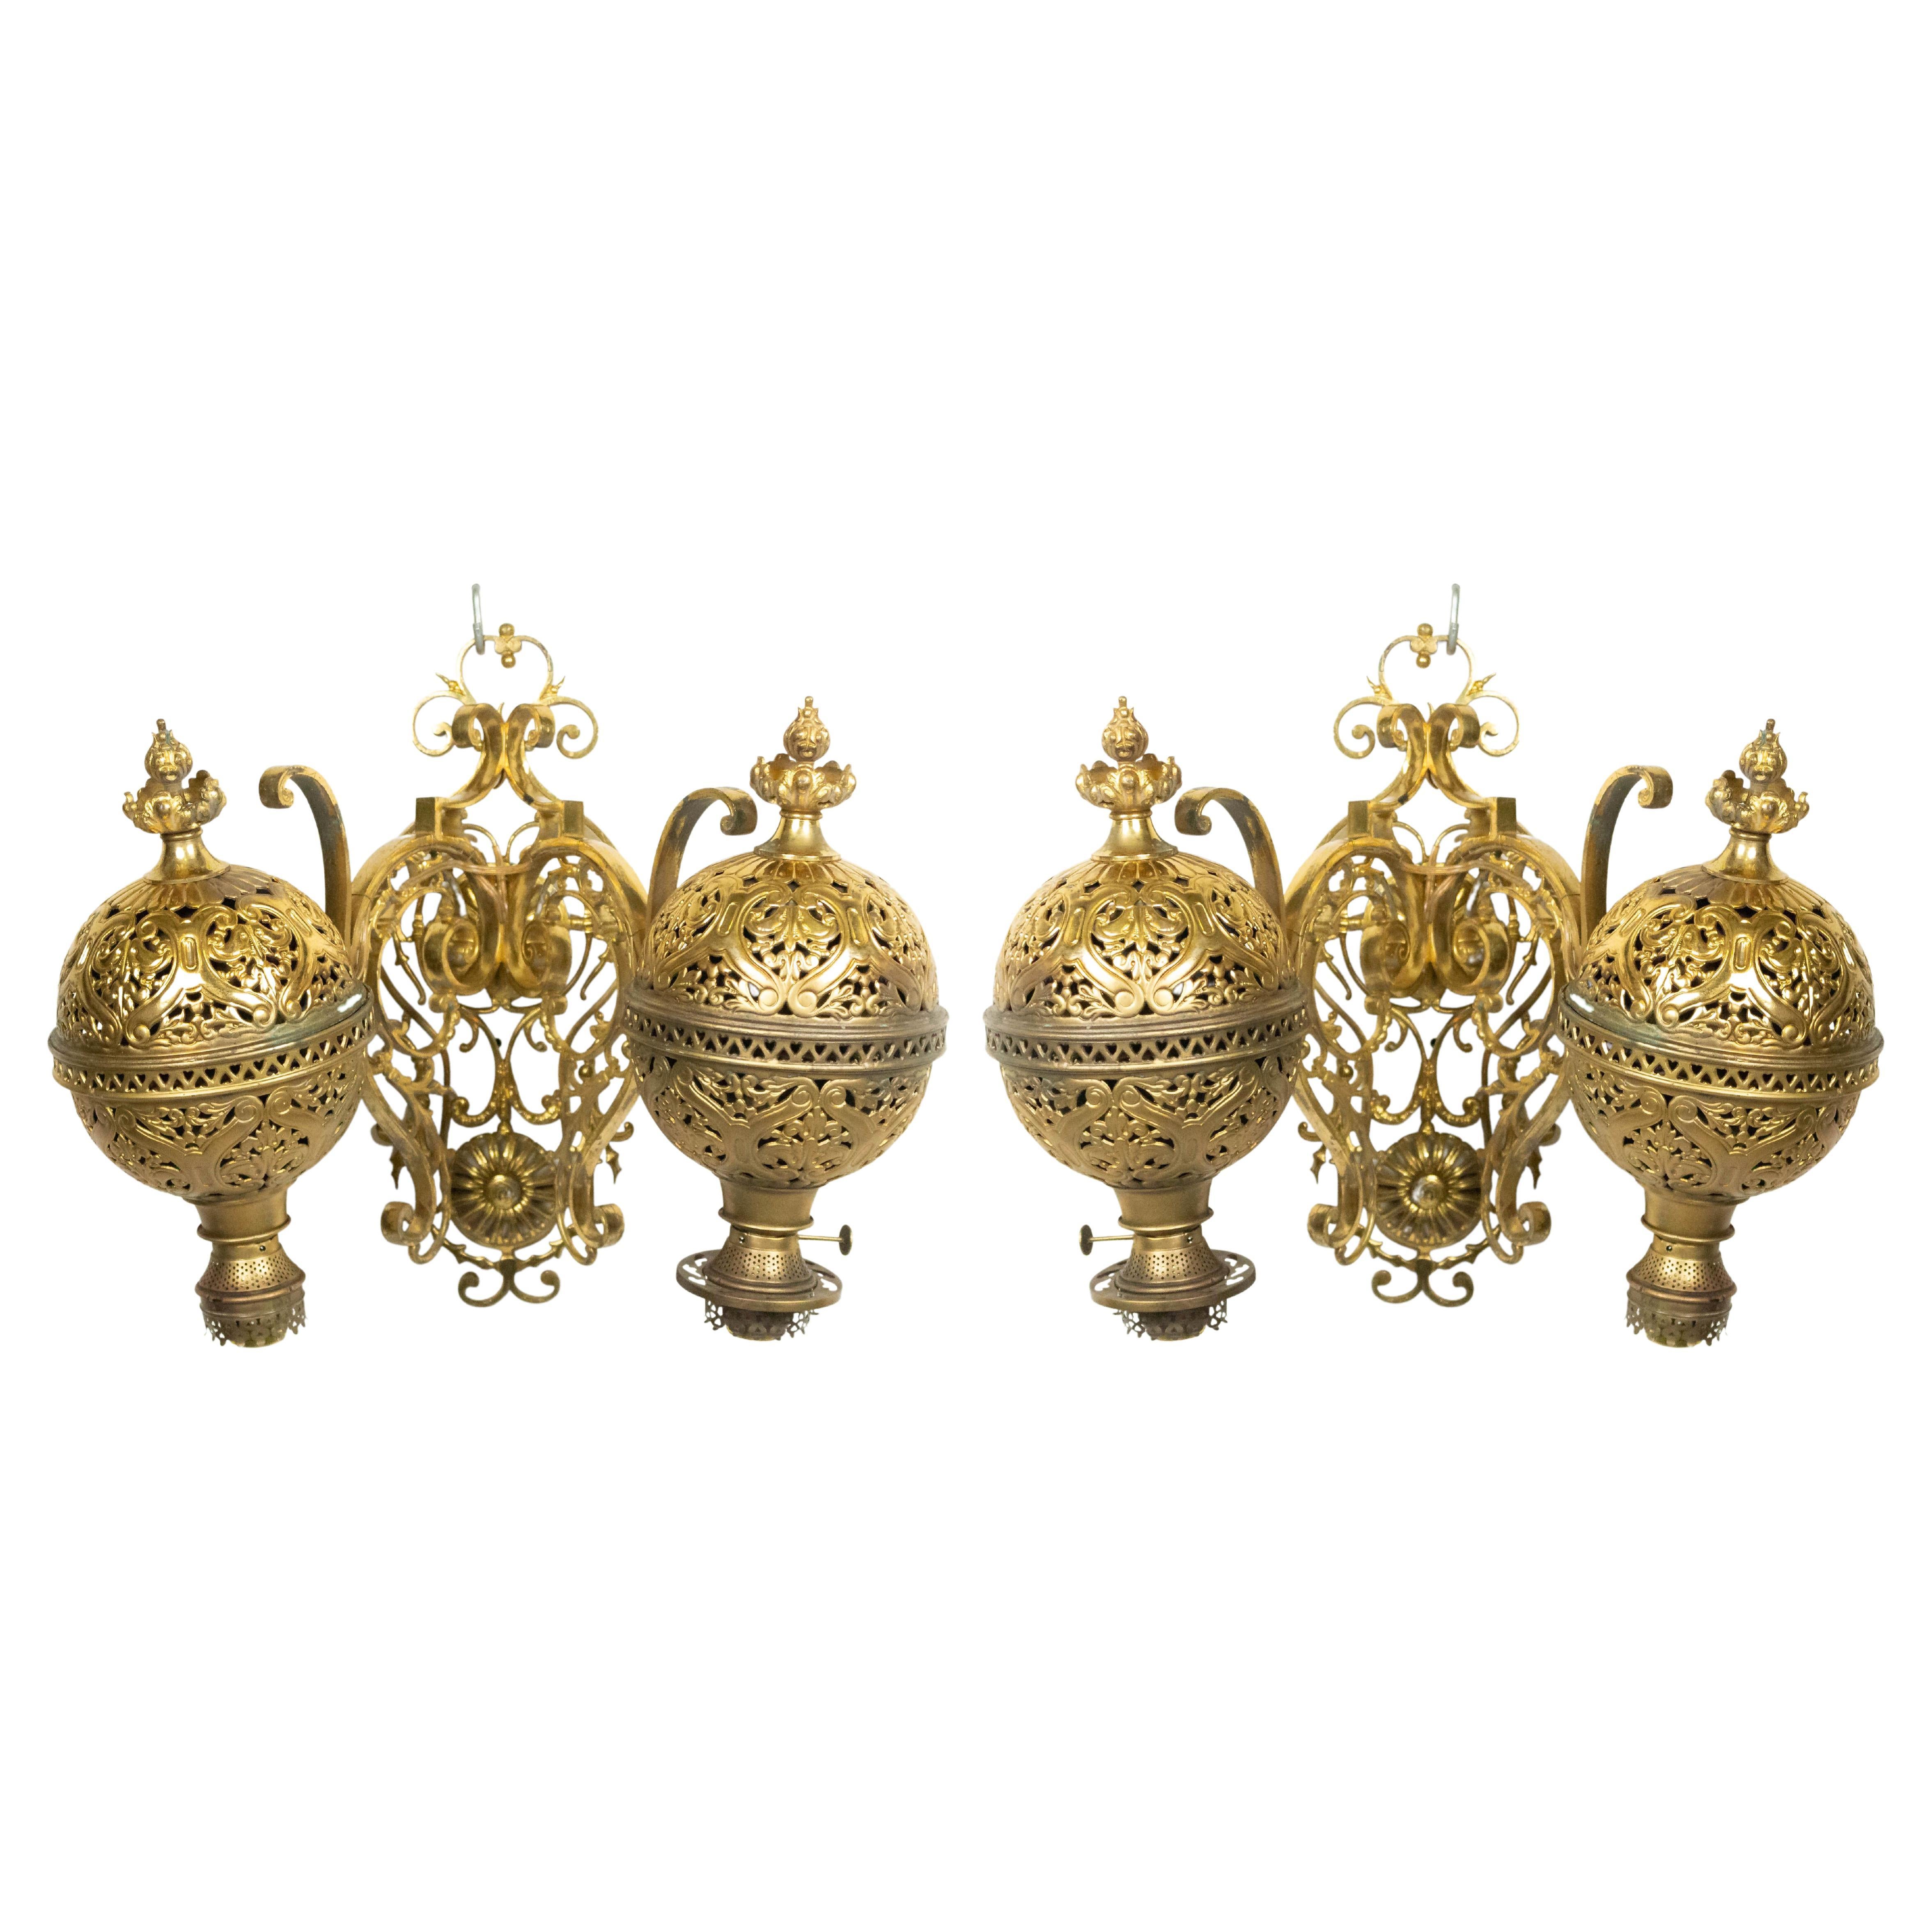 Pair of American Victorian Brass Filigree Oil Wall Sconces